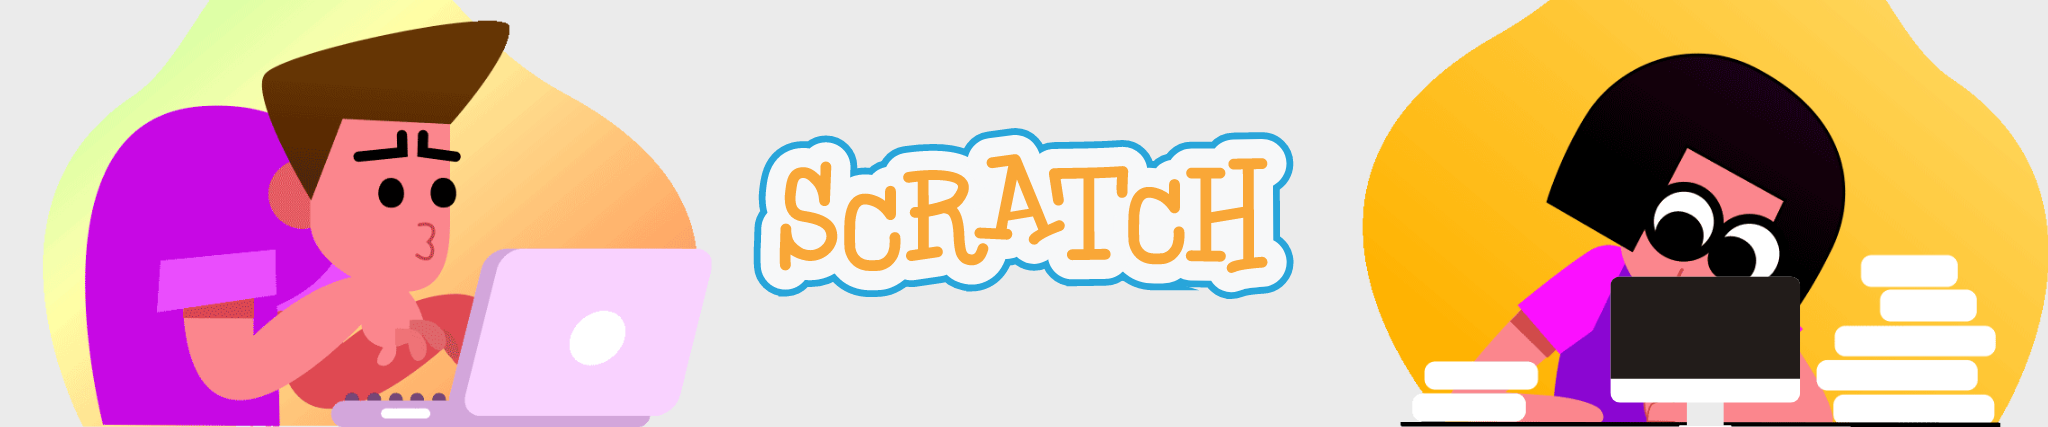 1-to-1 classes help children in Learning Scratch Coding